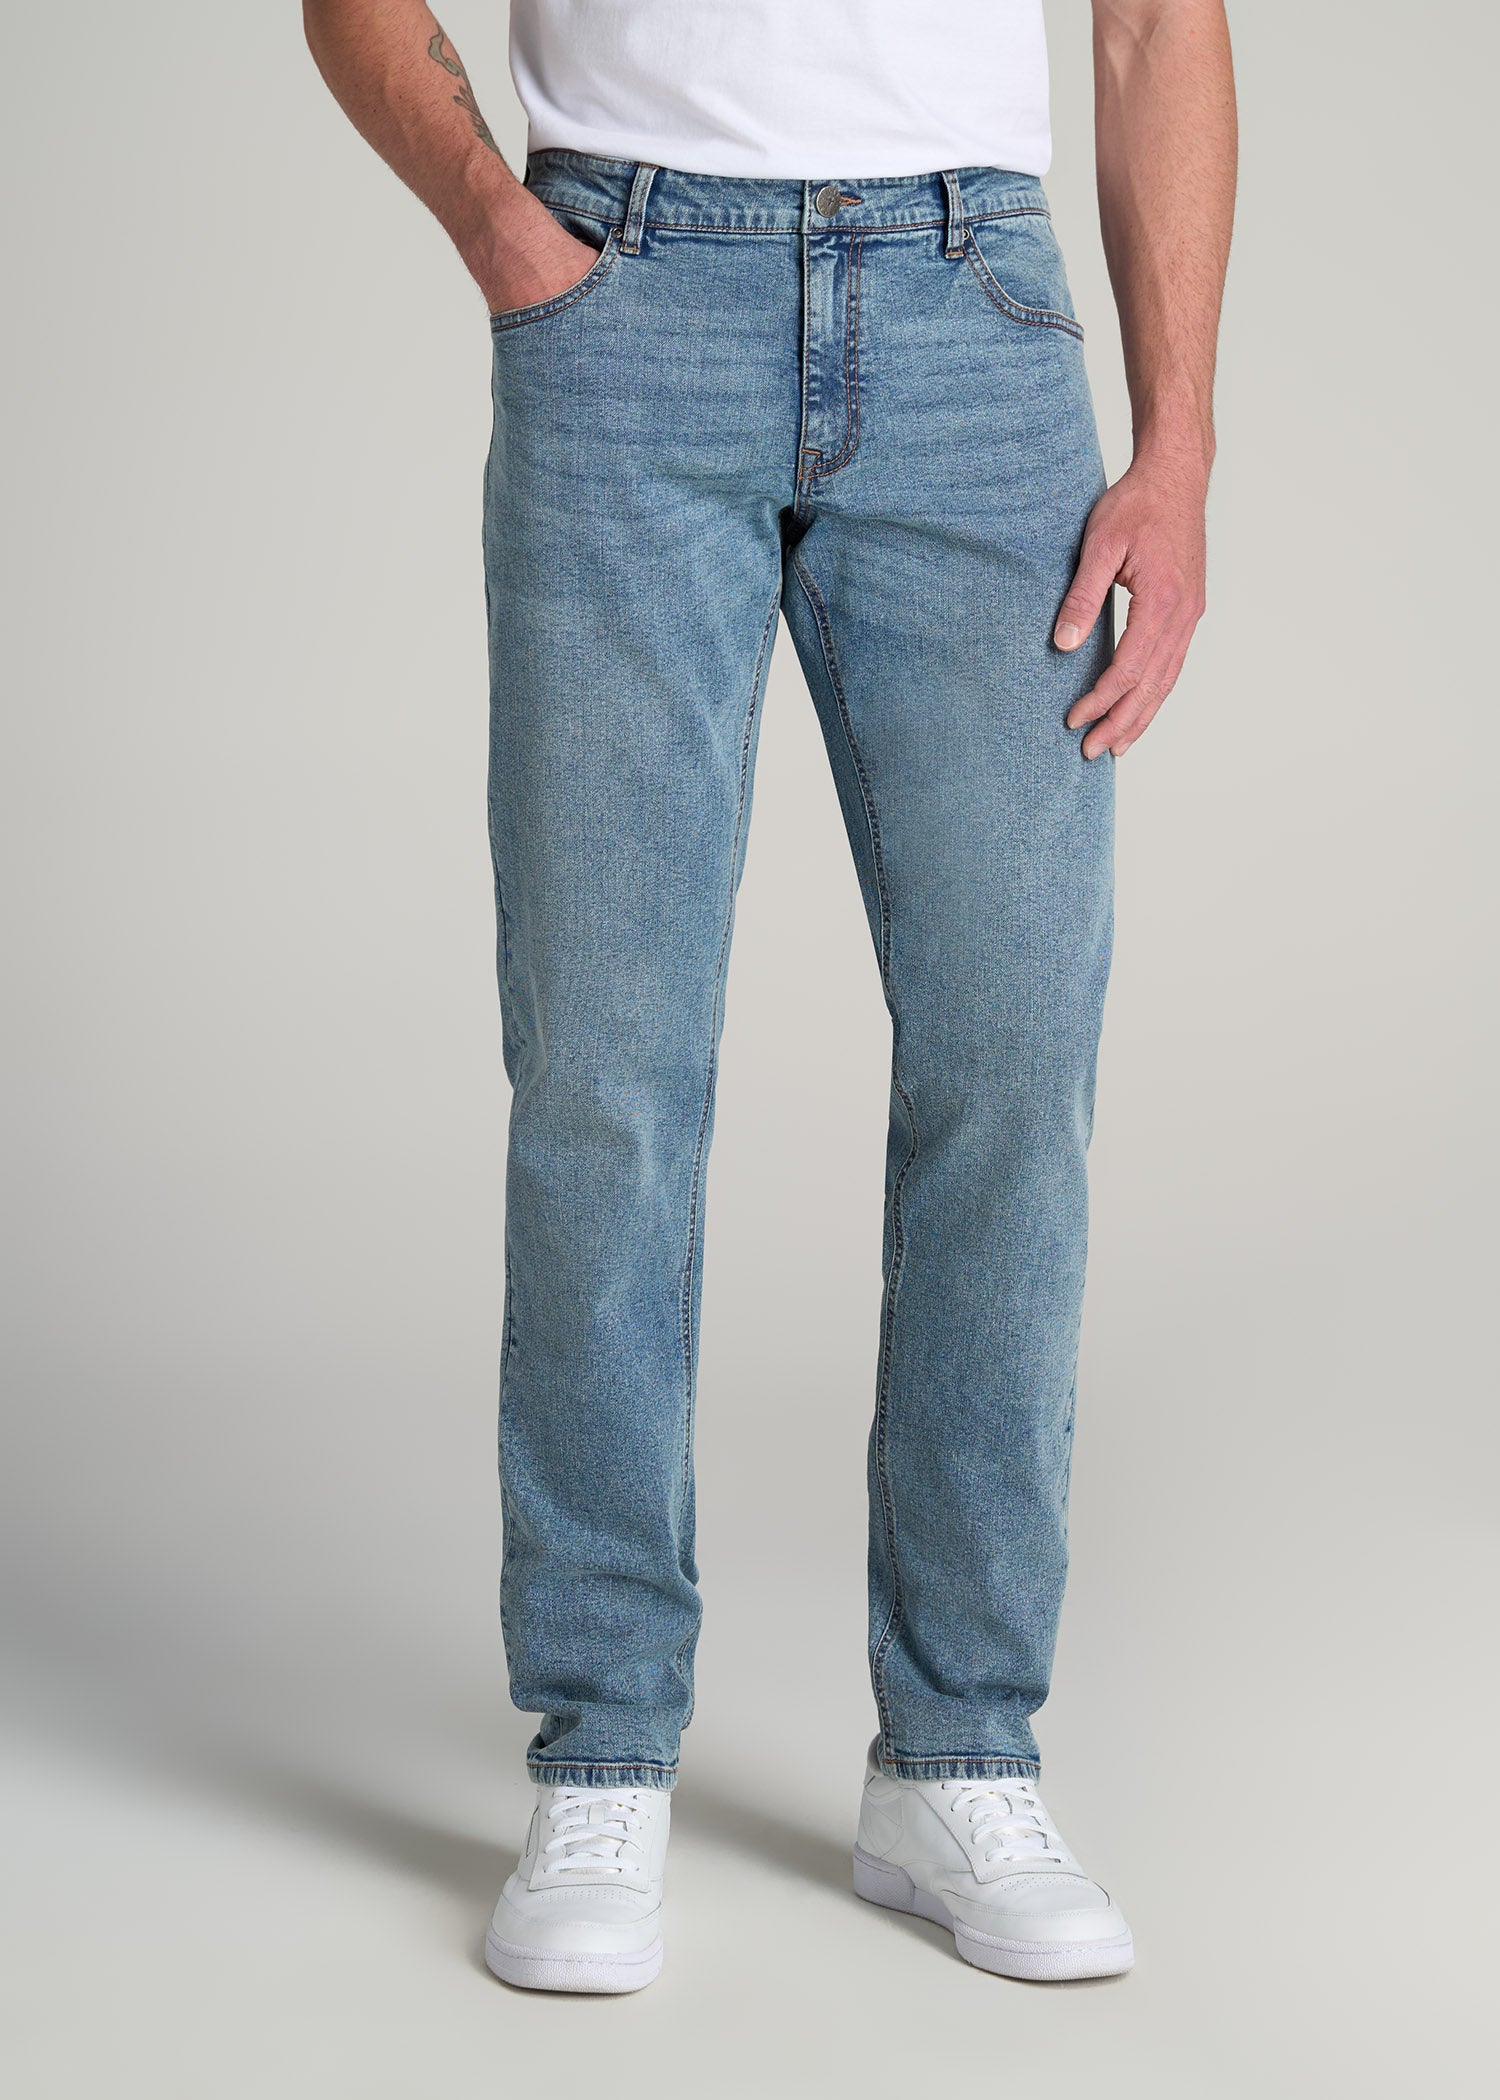 Carman TAPERED Jeans for Tall Men in Vintage Faded Blue